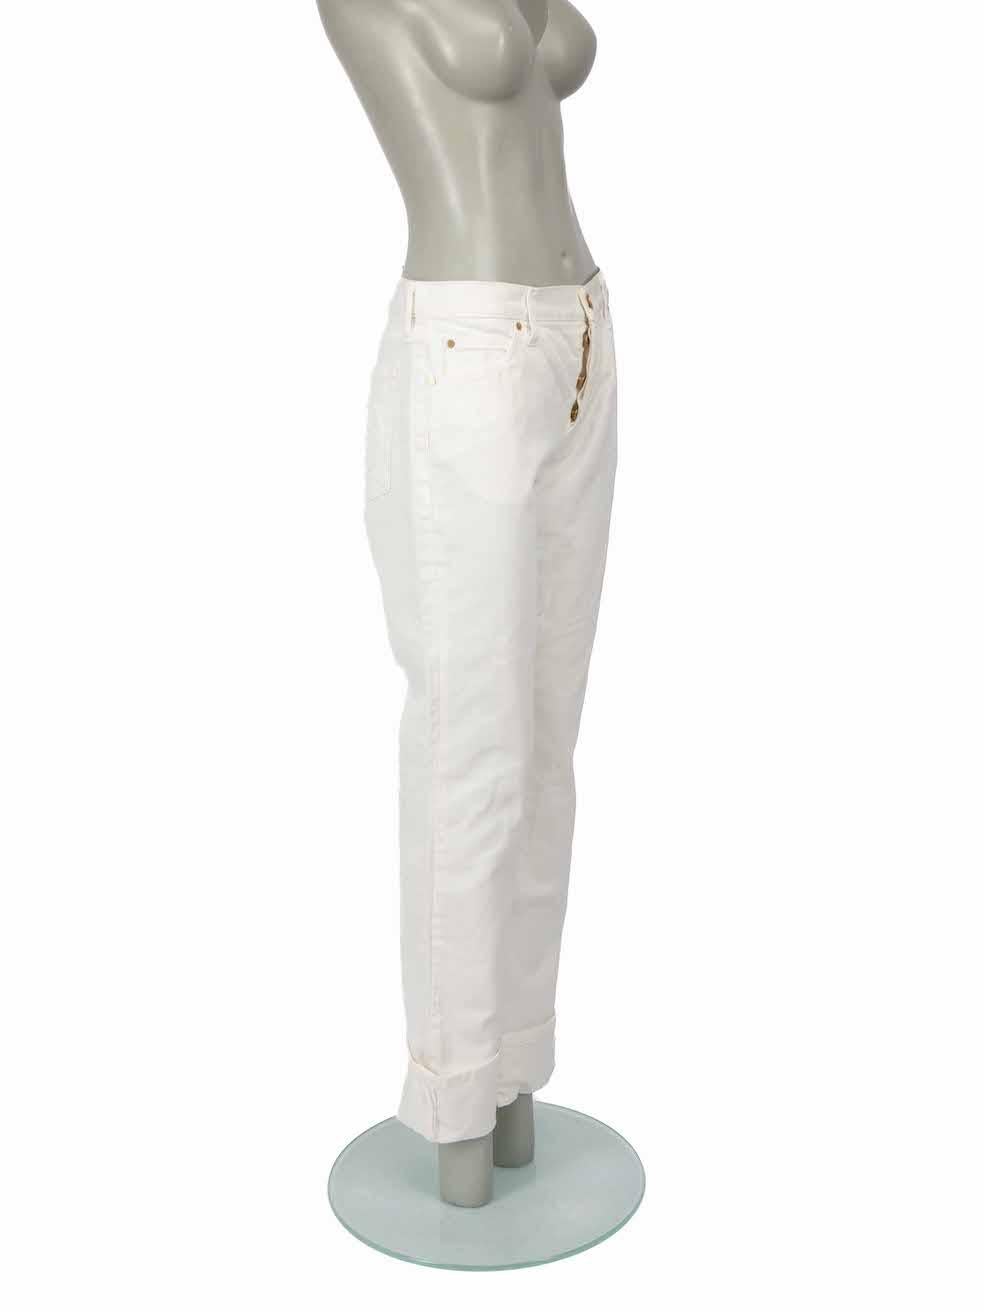 CONDITION is Very good. Minimal wear to jeans is evident. Minimal discoloured mark to front left leg on this used Gucci designer resale item.

Details
White
Cotton denim
Jeans
Straight fit
Mid rise
Button up fastening
3x Front pockets
2x Back